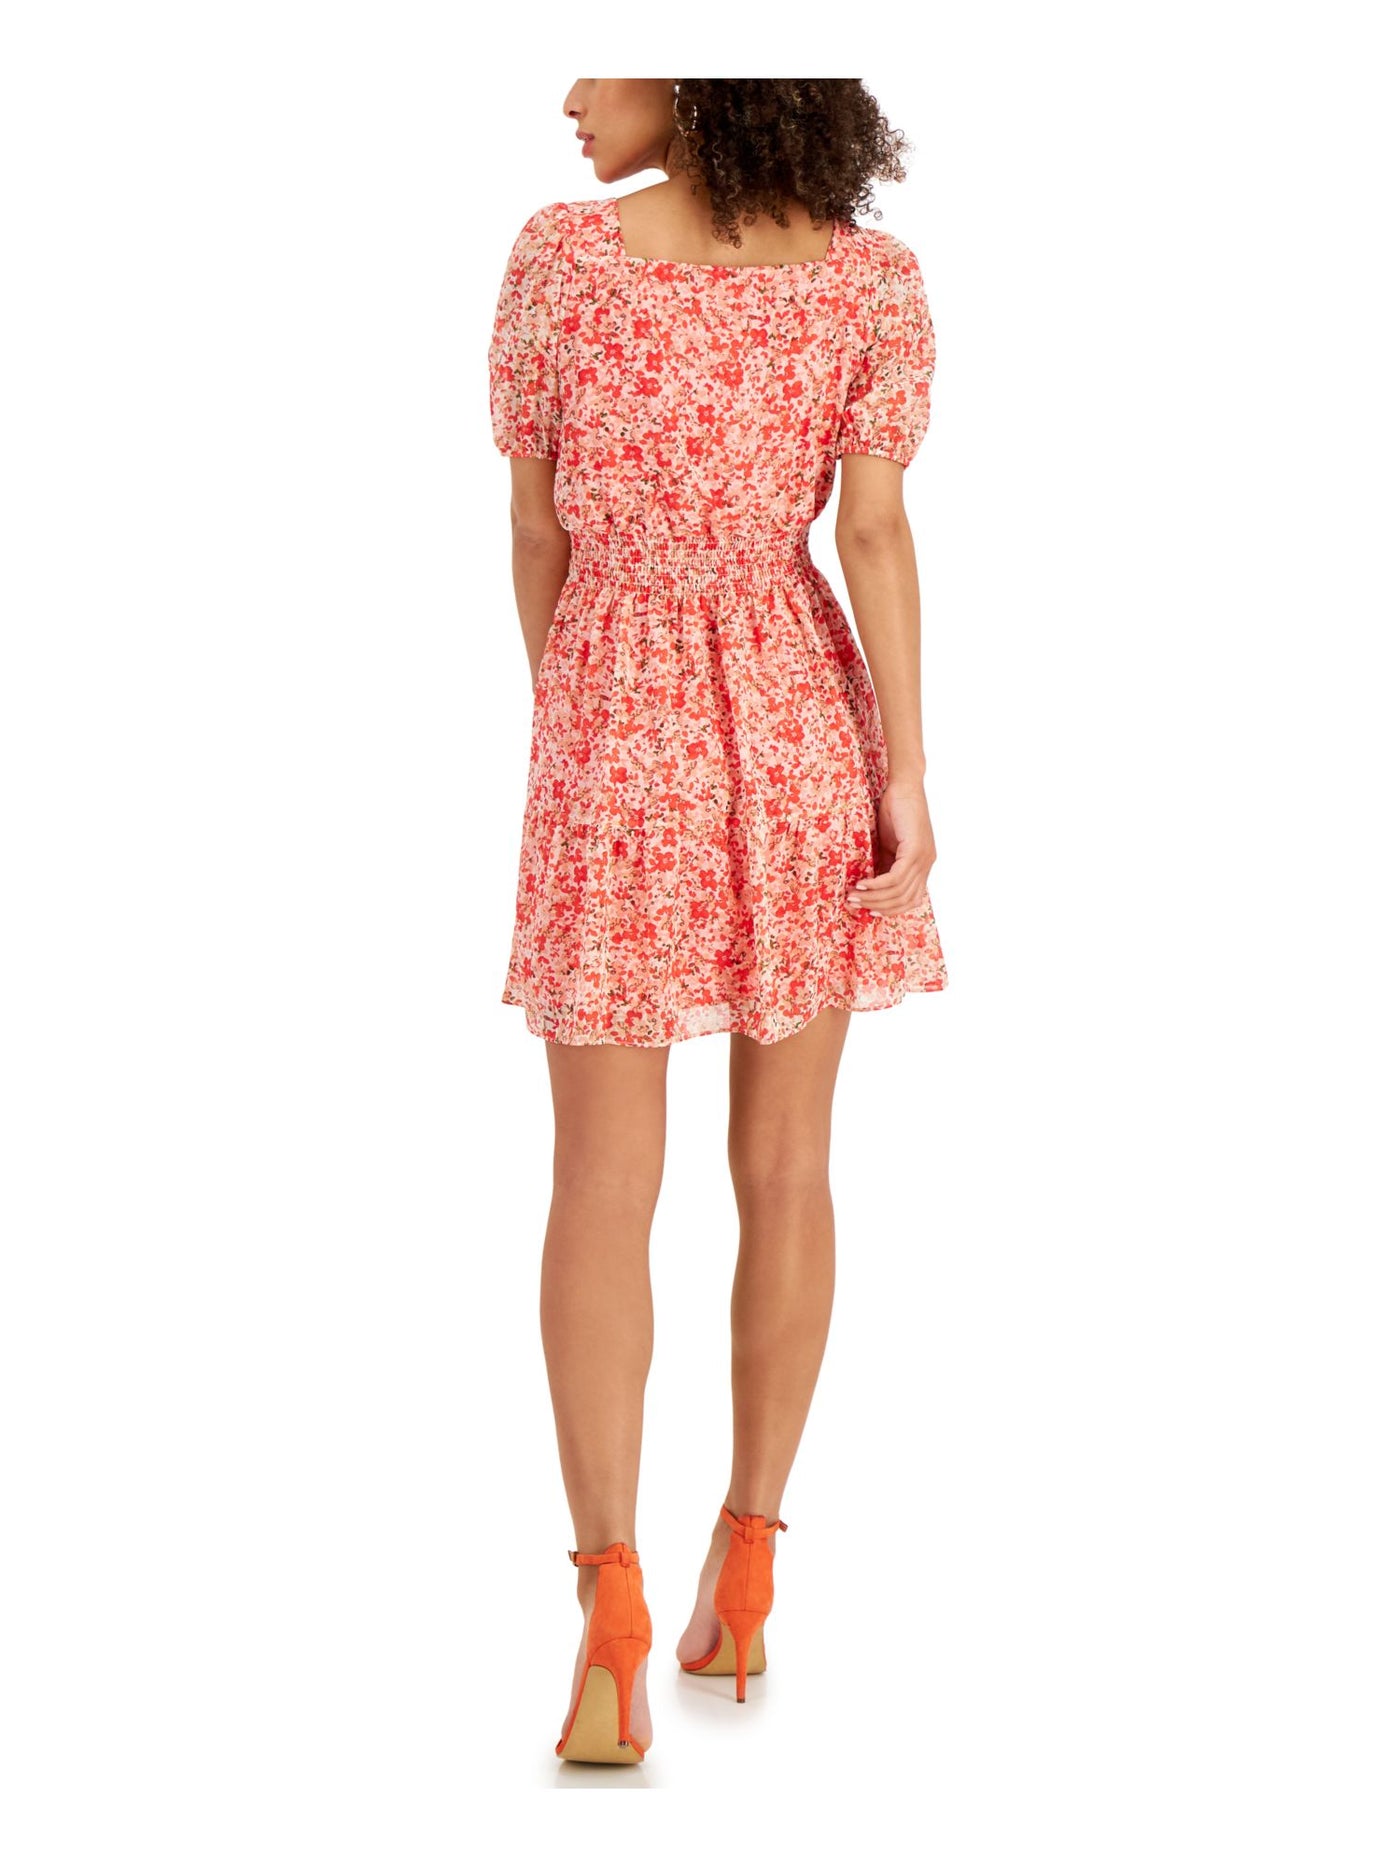 TAYLOR Womens Coral Smocked Button Front Lined Floral Elbow Sleeve Square Neck Above The Knee Party Blouson Dress Petites 12P